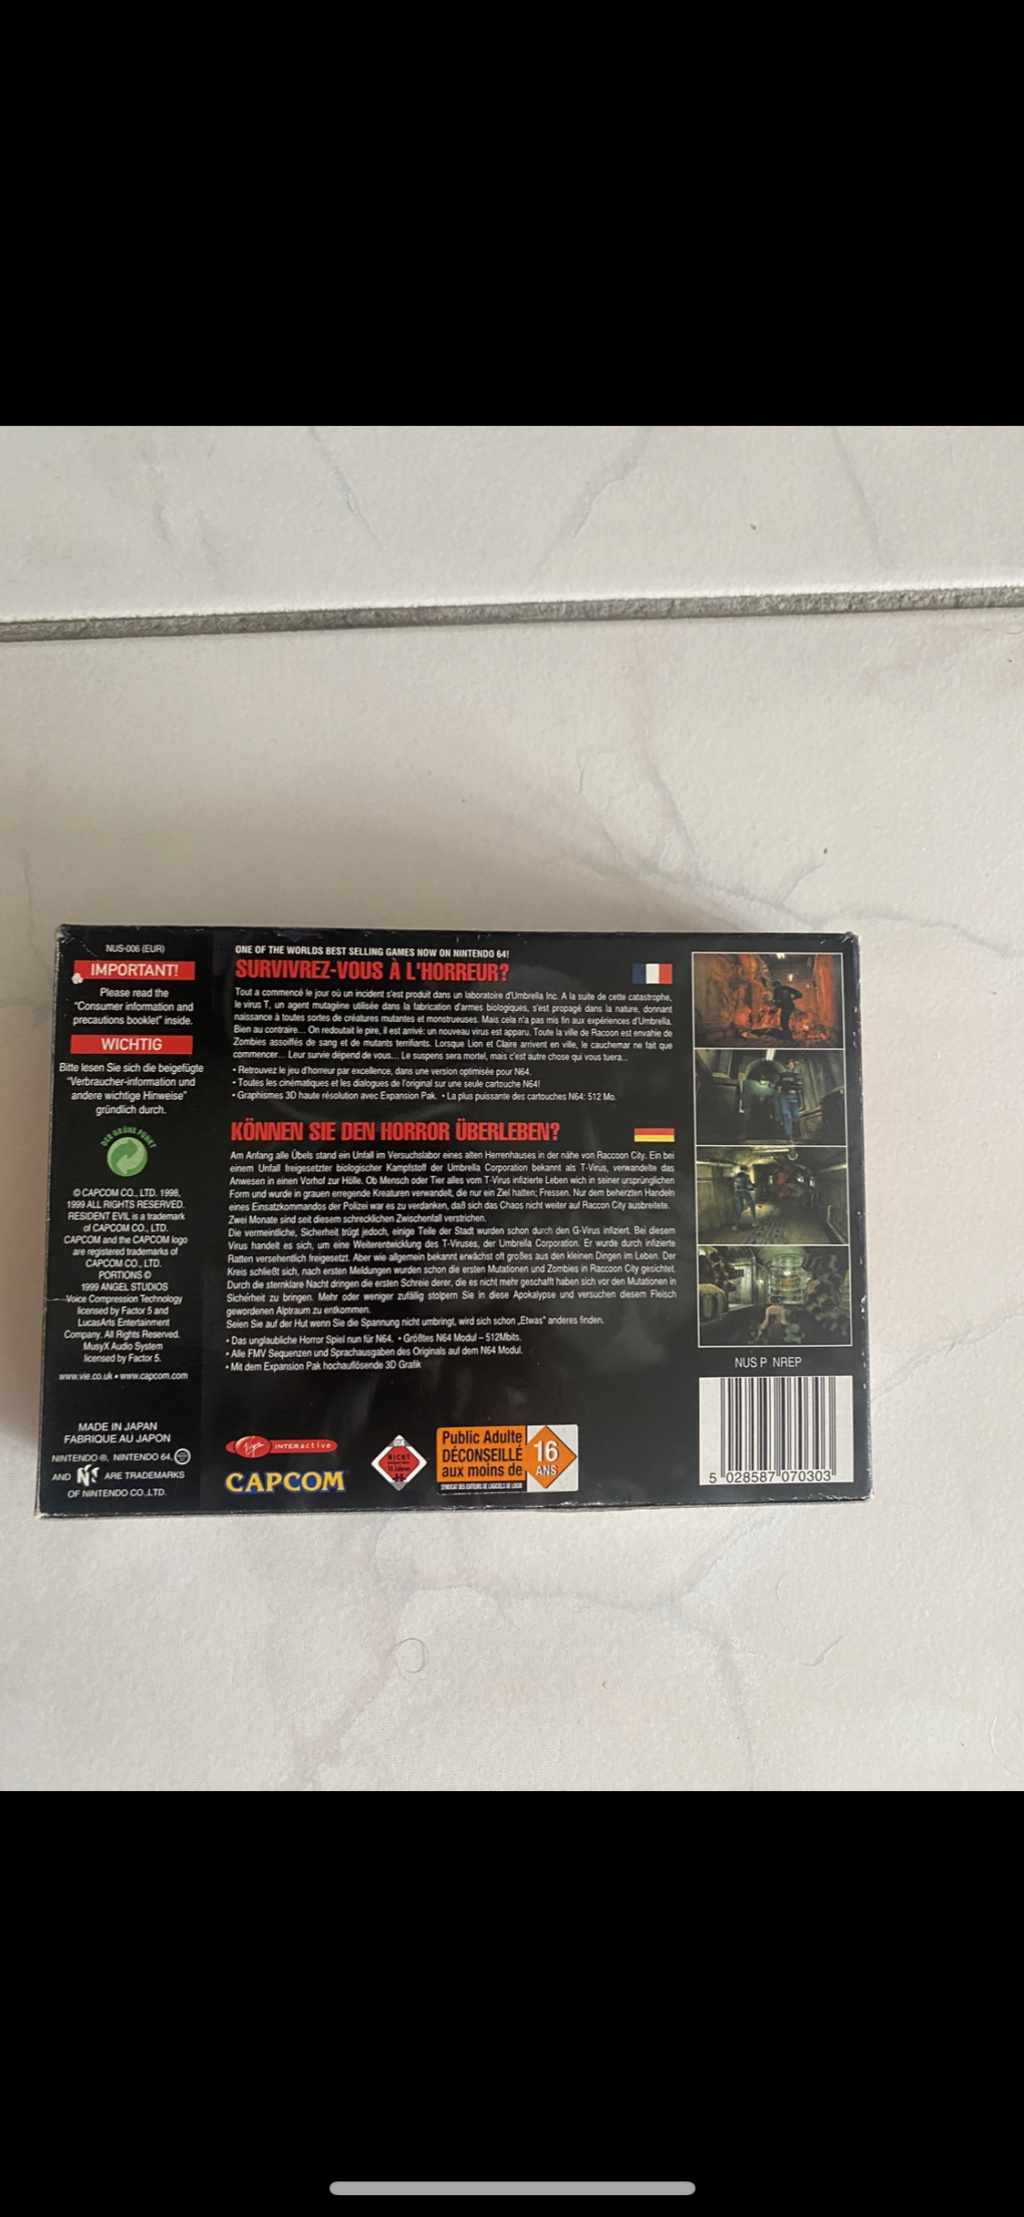 [VENTE] Resident Evil 64 complet + jeux gba neuf  Img_1310